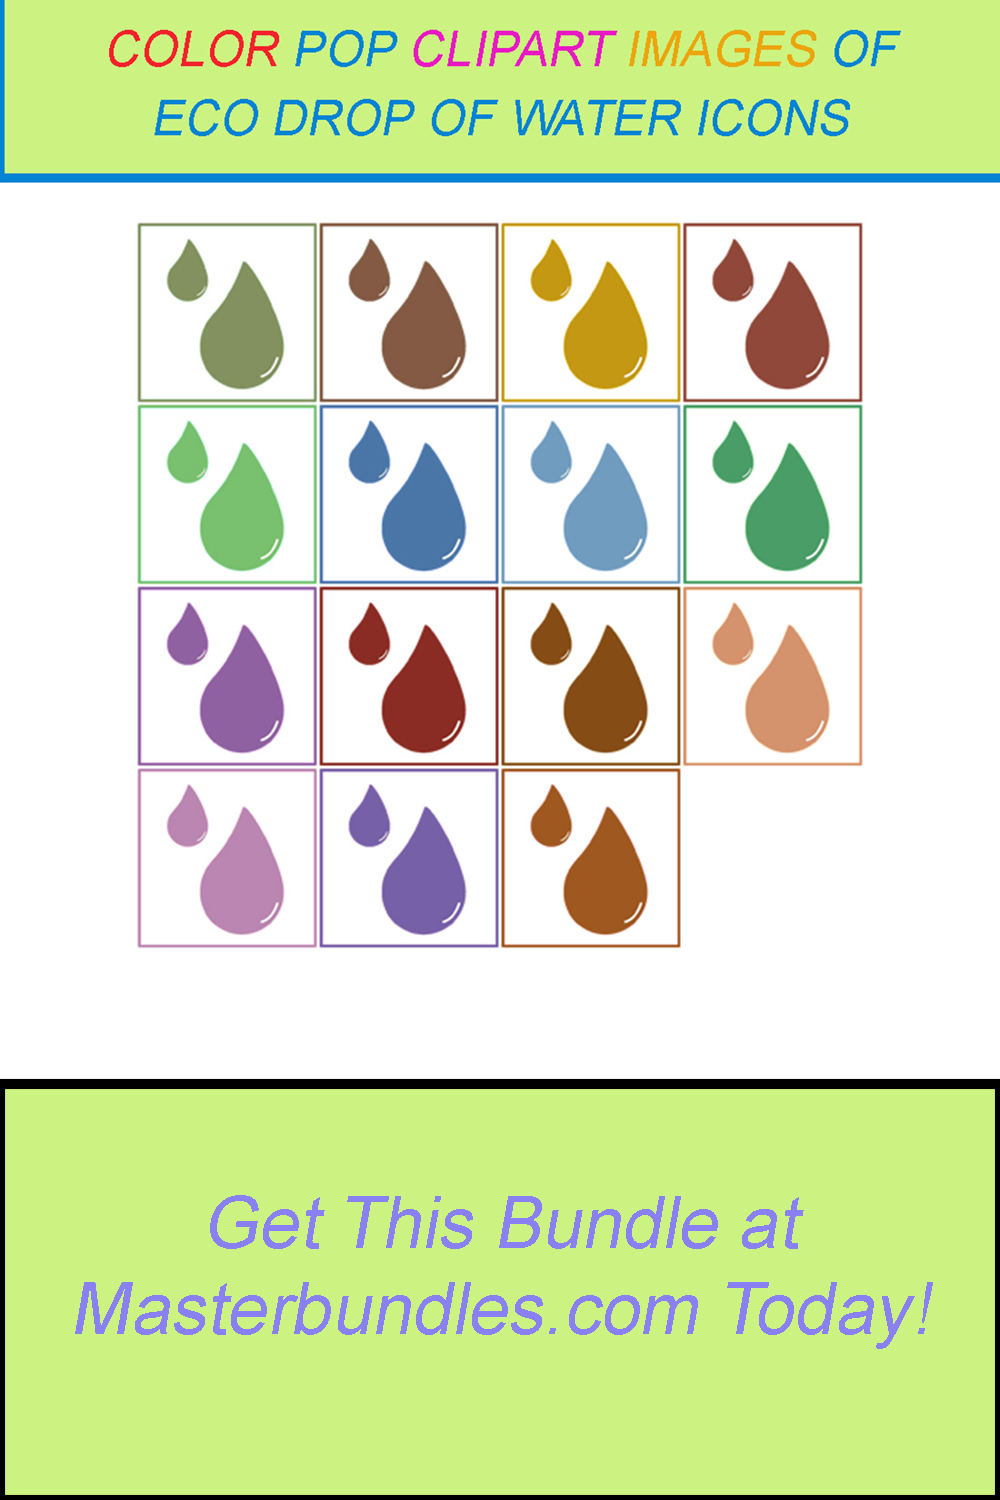 15 COLOR POP CLIPART IMAGES OF ECO DROP OF WATER ICONS pinterest preview image.